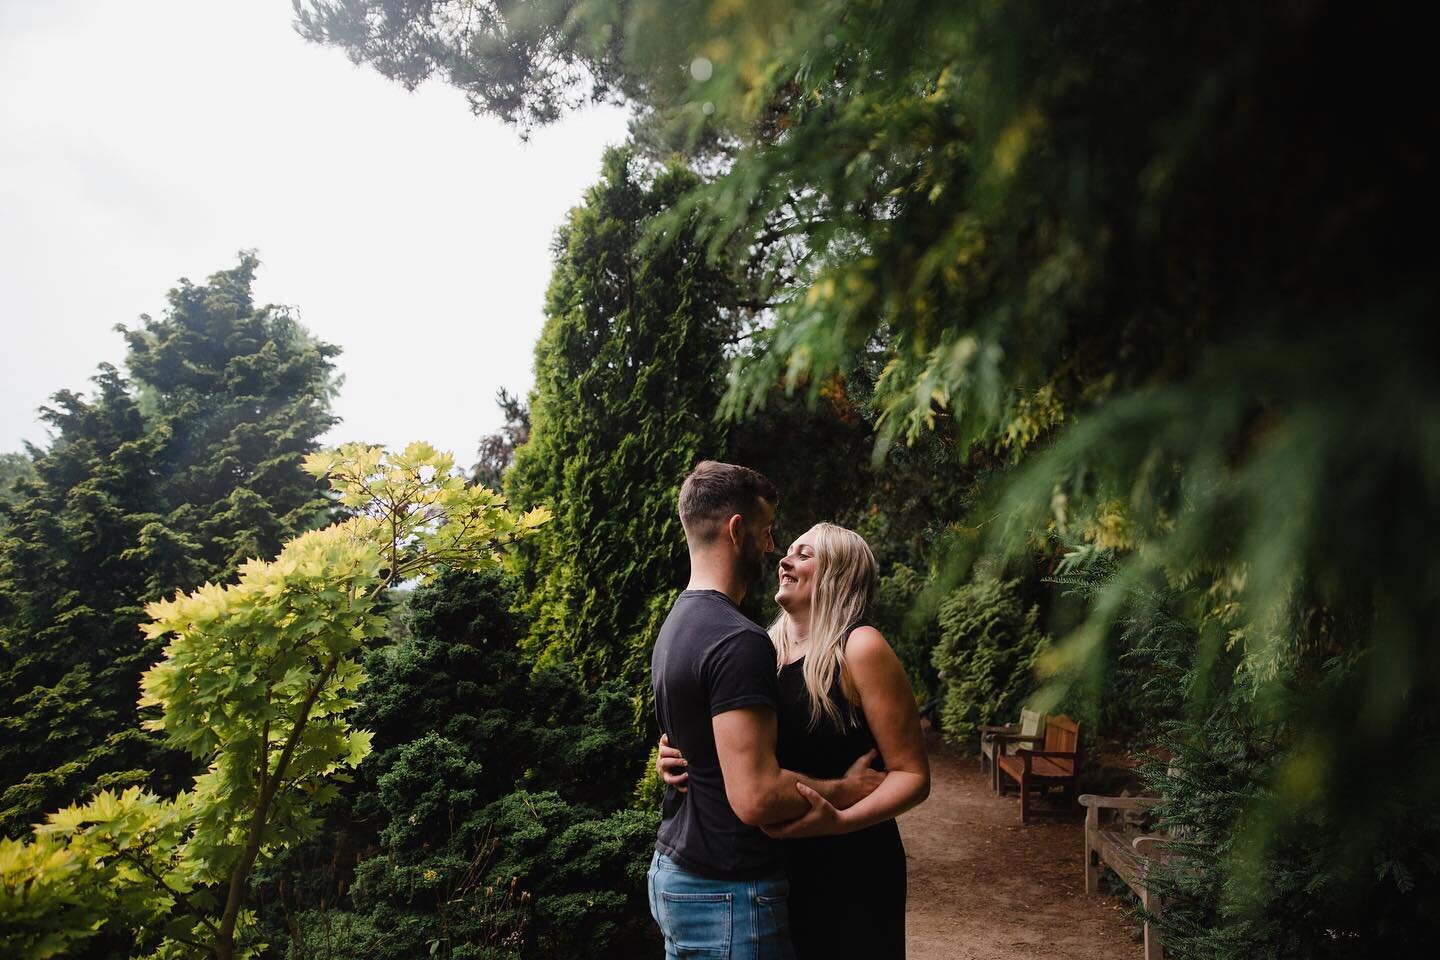 Pre-Wedding Vibes!
Emma and Mark tie the knot tomorrow at @sandholeoakbarn and I can&rsquo;t wait!
Here&rsquo;s a sneak peek of what we got up to for their pre-wedding shoot at #fletchermosspark 
#prewedding #wedding #weddingphotography #preweddingsh